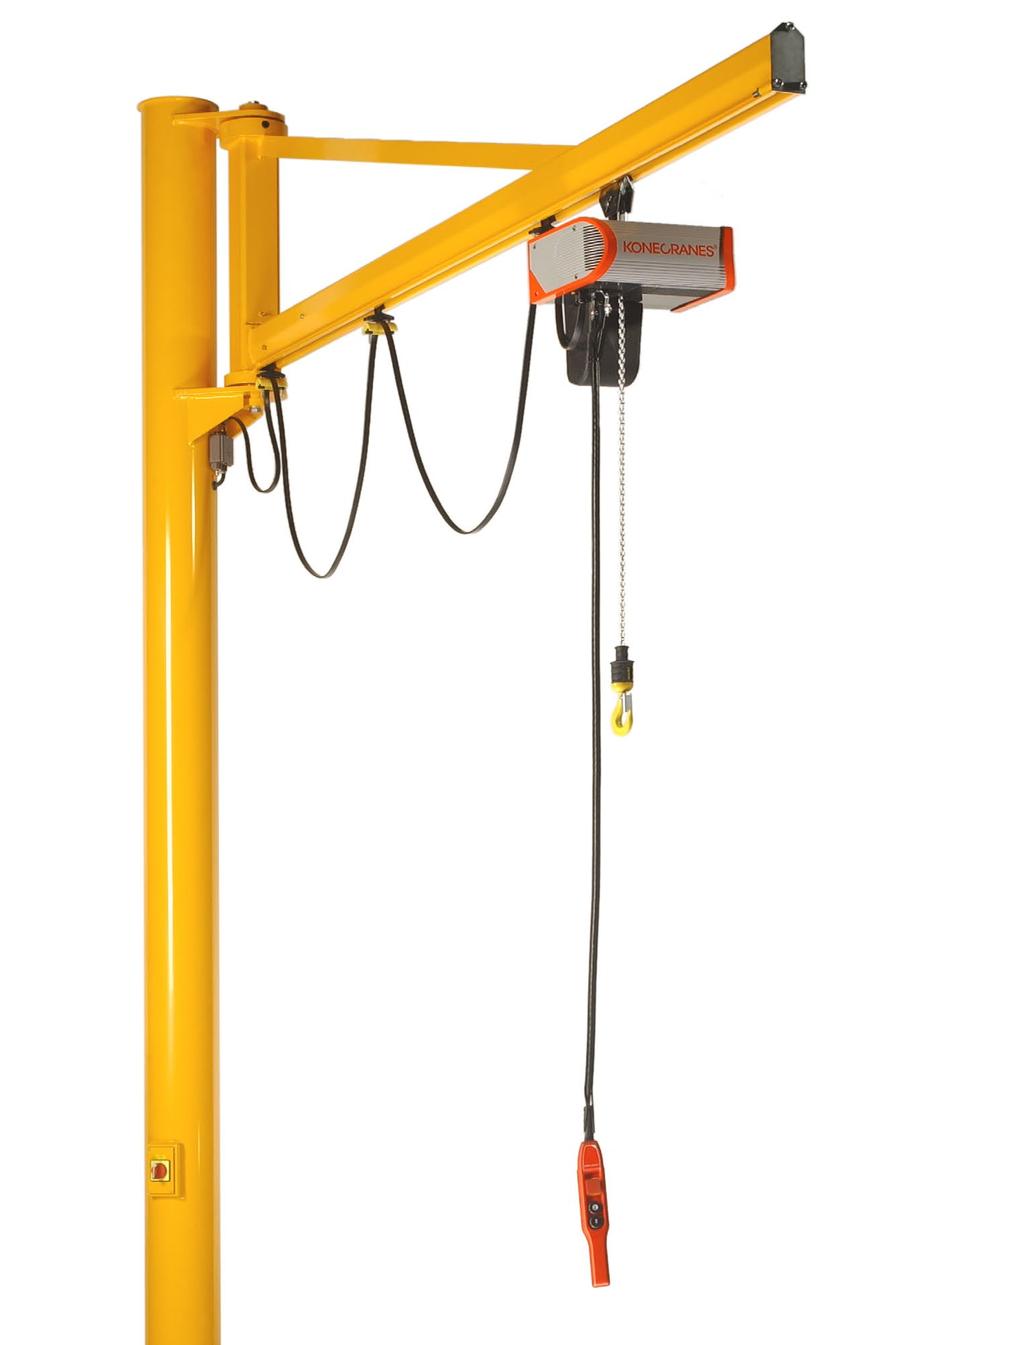 JIB CRANES FOR A CHANGING WORK ENVIRONMENT Jib cranes are a cost-effective method of handling loads of up to 2,000 kg.